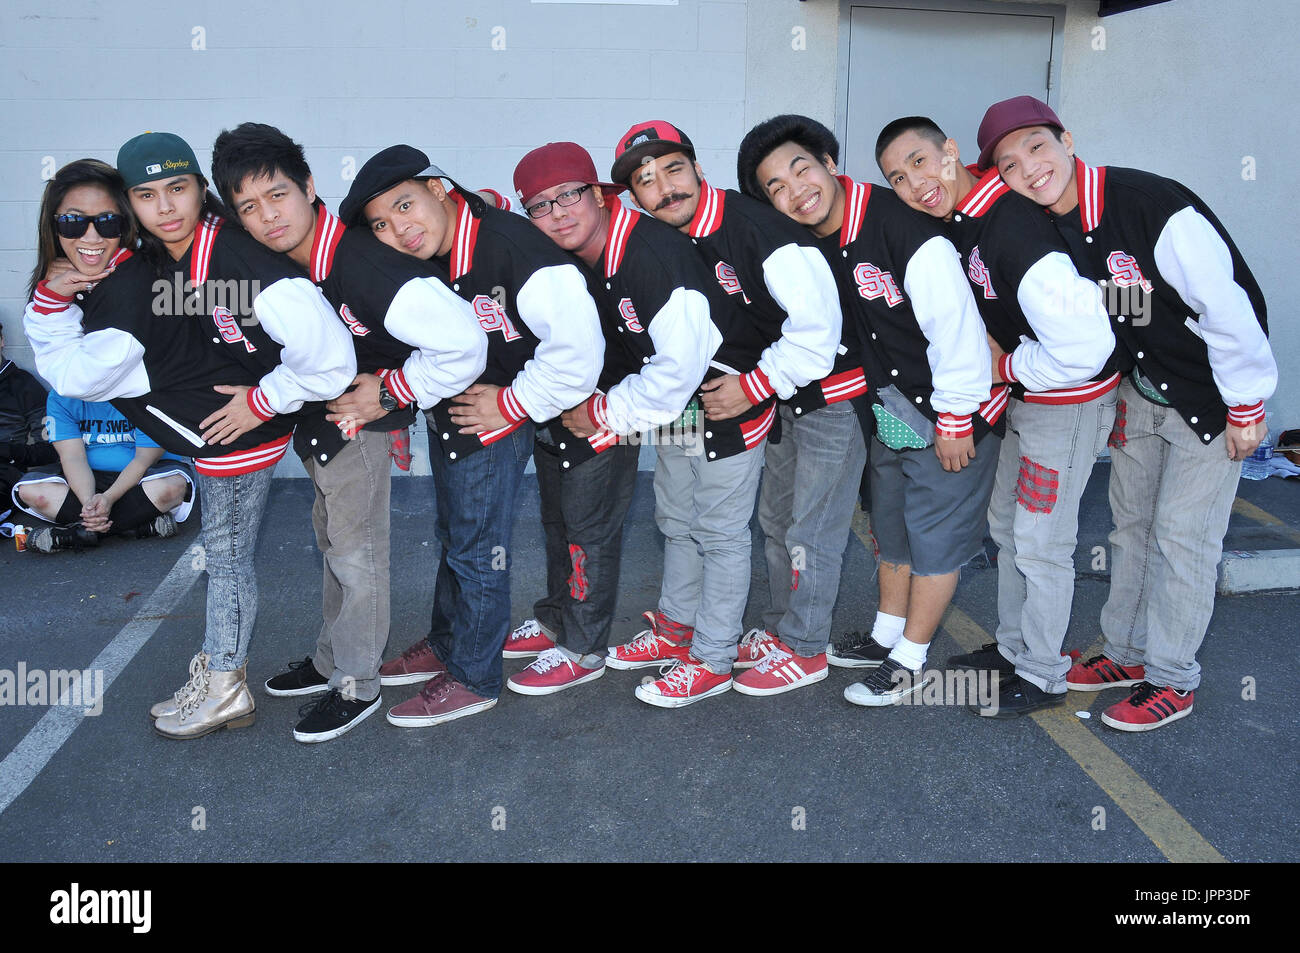 Step Boys from Sacramento, CA at Randy Jackson's America's Best Dance Crew Season 7 Season Of The Superstars - Los Angeles Auditions at Center Staging in Burbank, CA. The event took place on Saturday, January 28, 2012. Photo by Sthanlee B. Mirador Pacific Rim Photo Press. Stock Photo